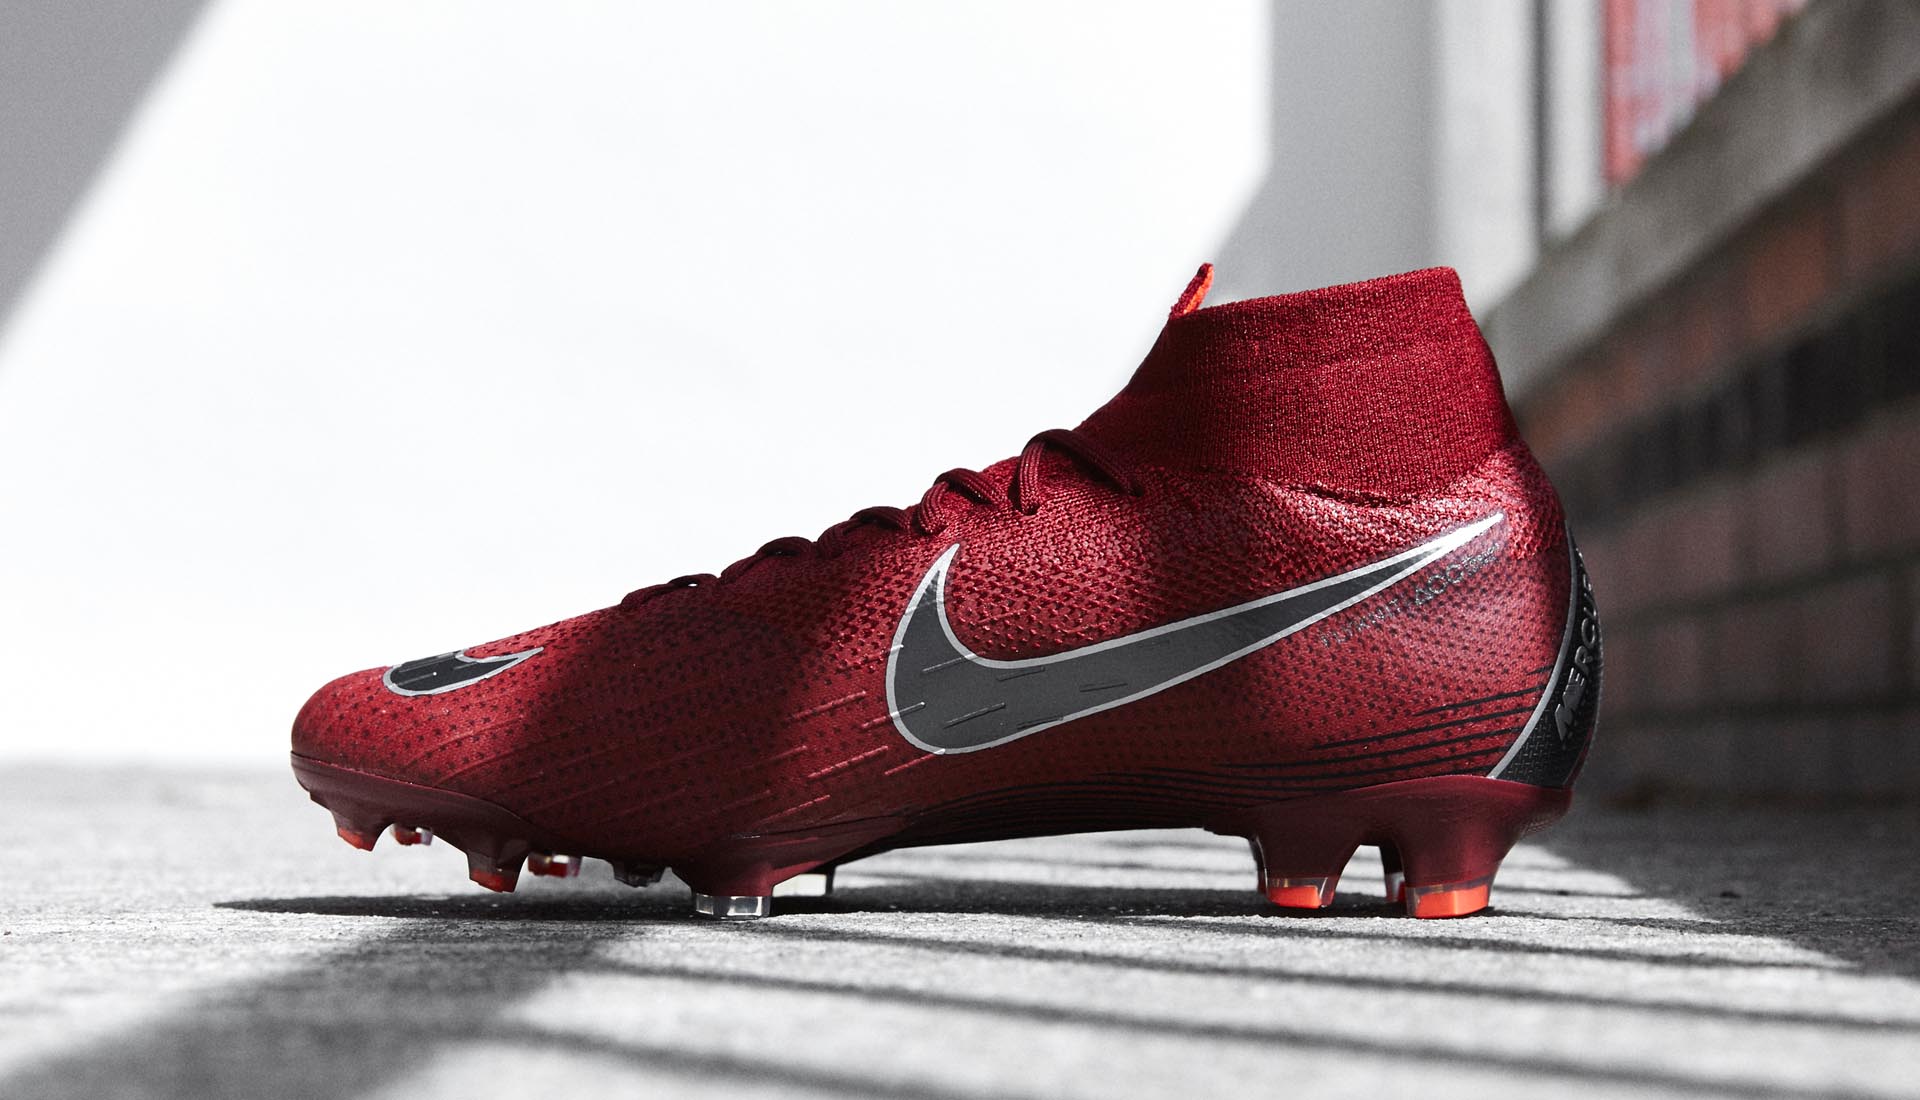 Gelovige industrie verband Nike Launch The Mercurial Superfly 360 "Rising Fire" - SoccerBible